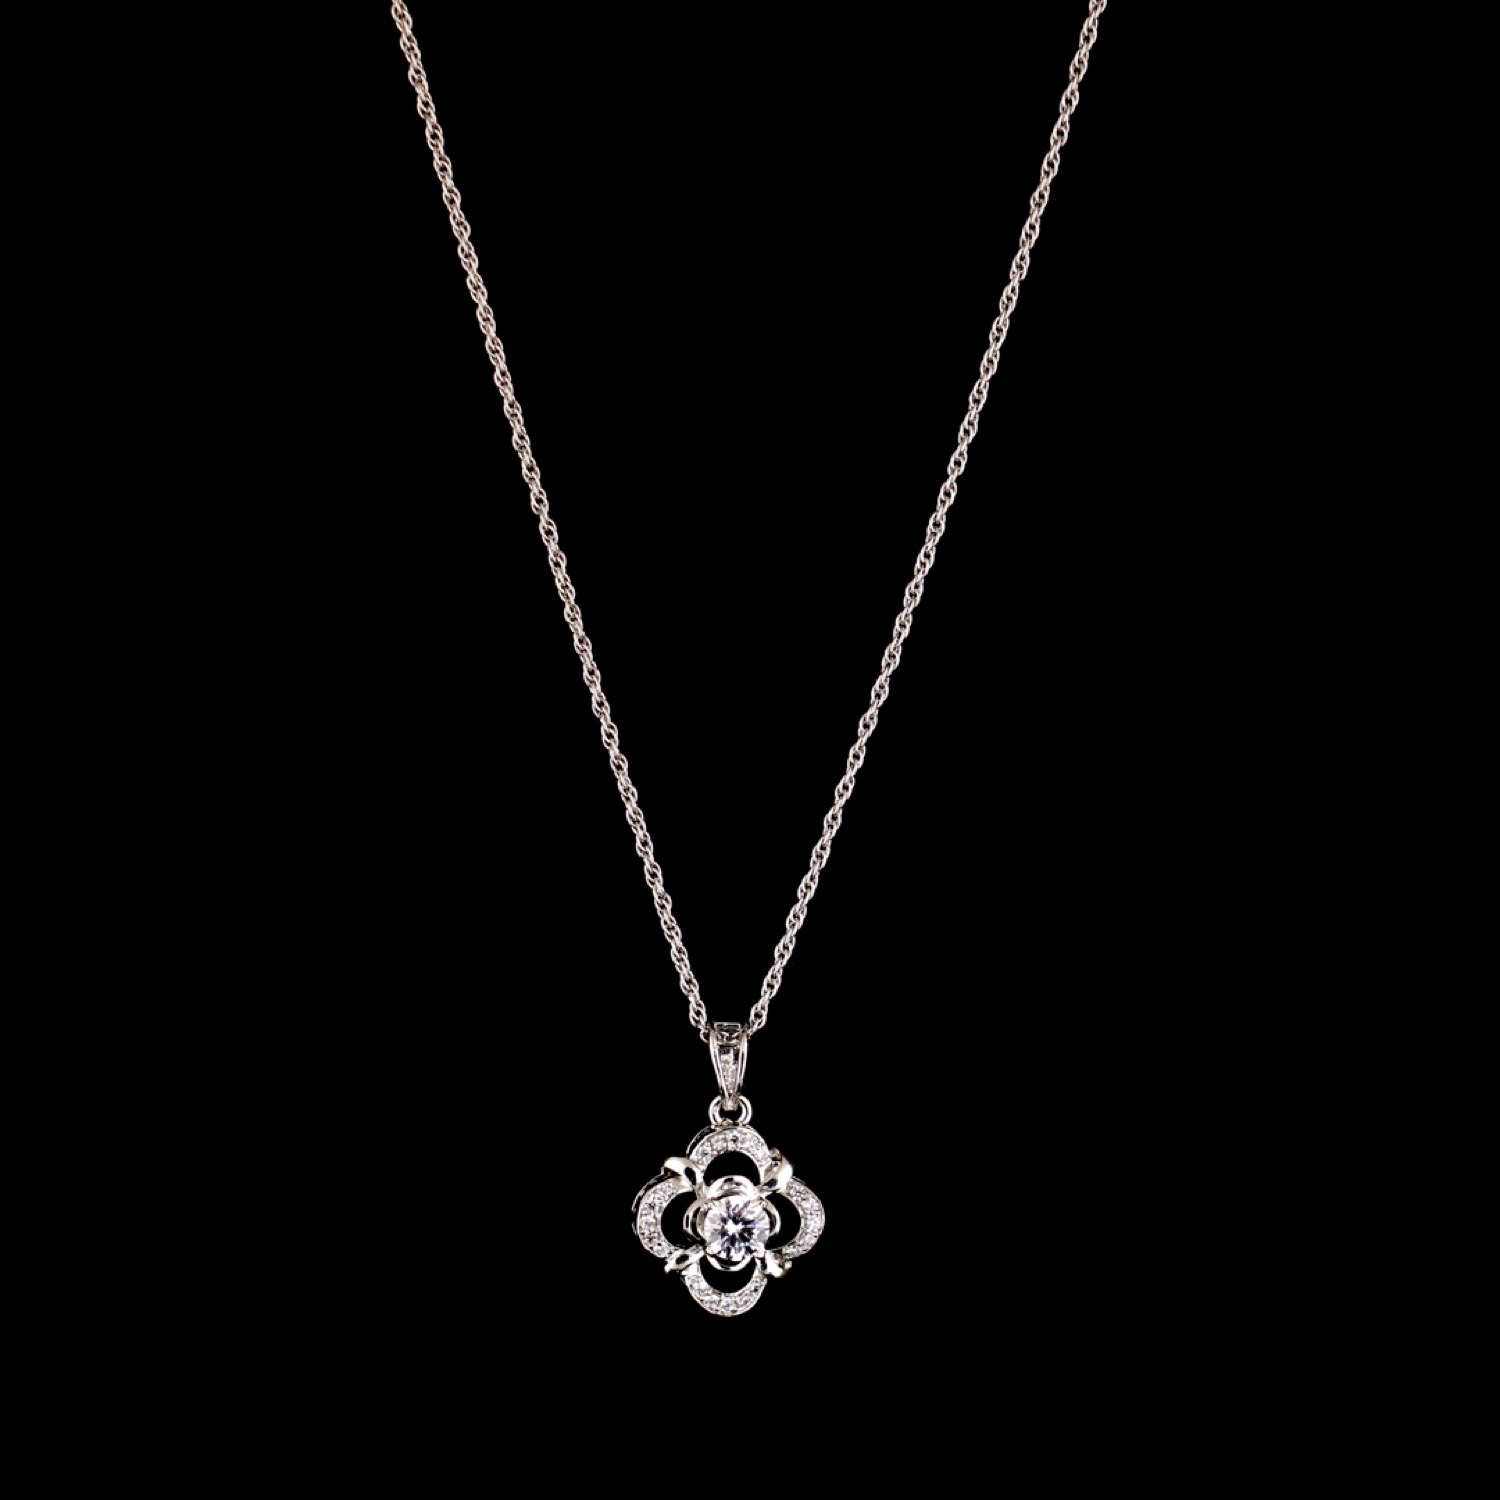 varam_chains_four_clover_shape_white_stone_pendant_with_silver_chain-1